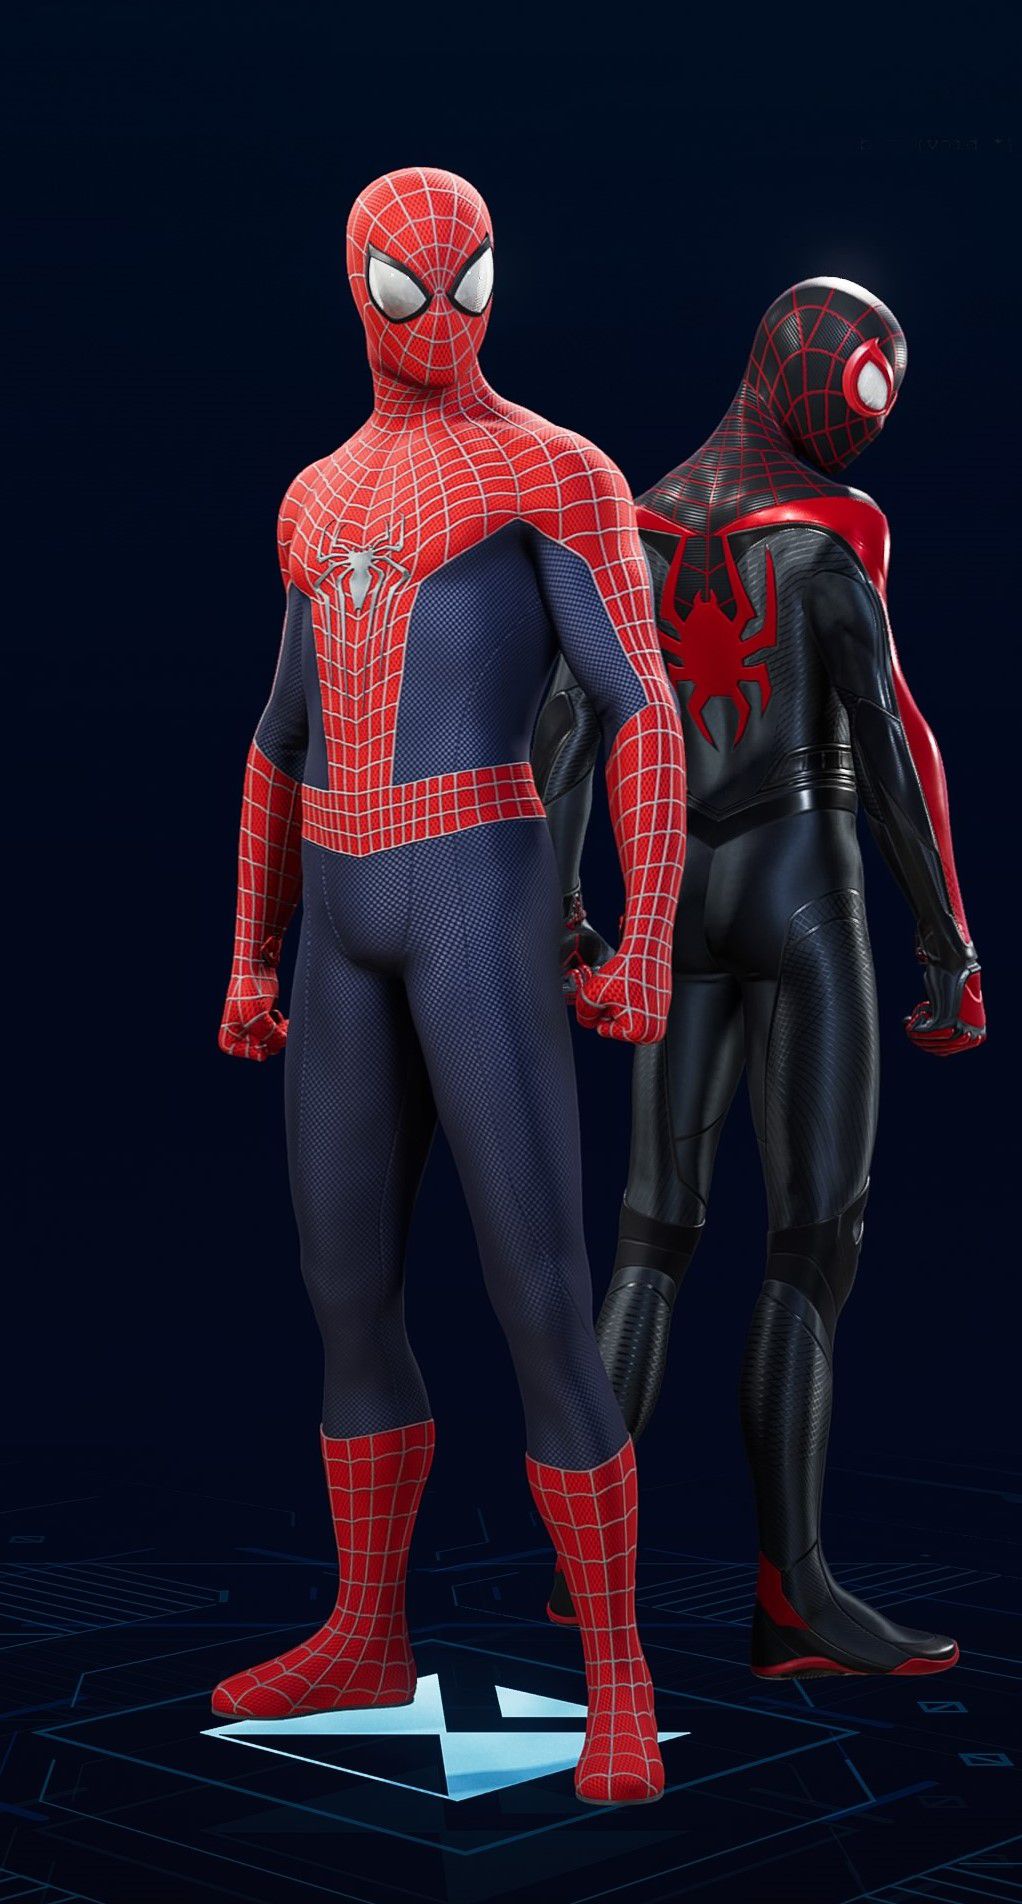 Peter Parker stands in his Amazing 2 Suit in the suit selection screen of Spider-Man 2.